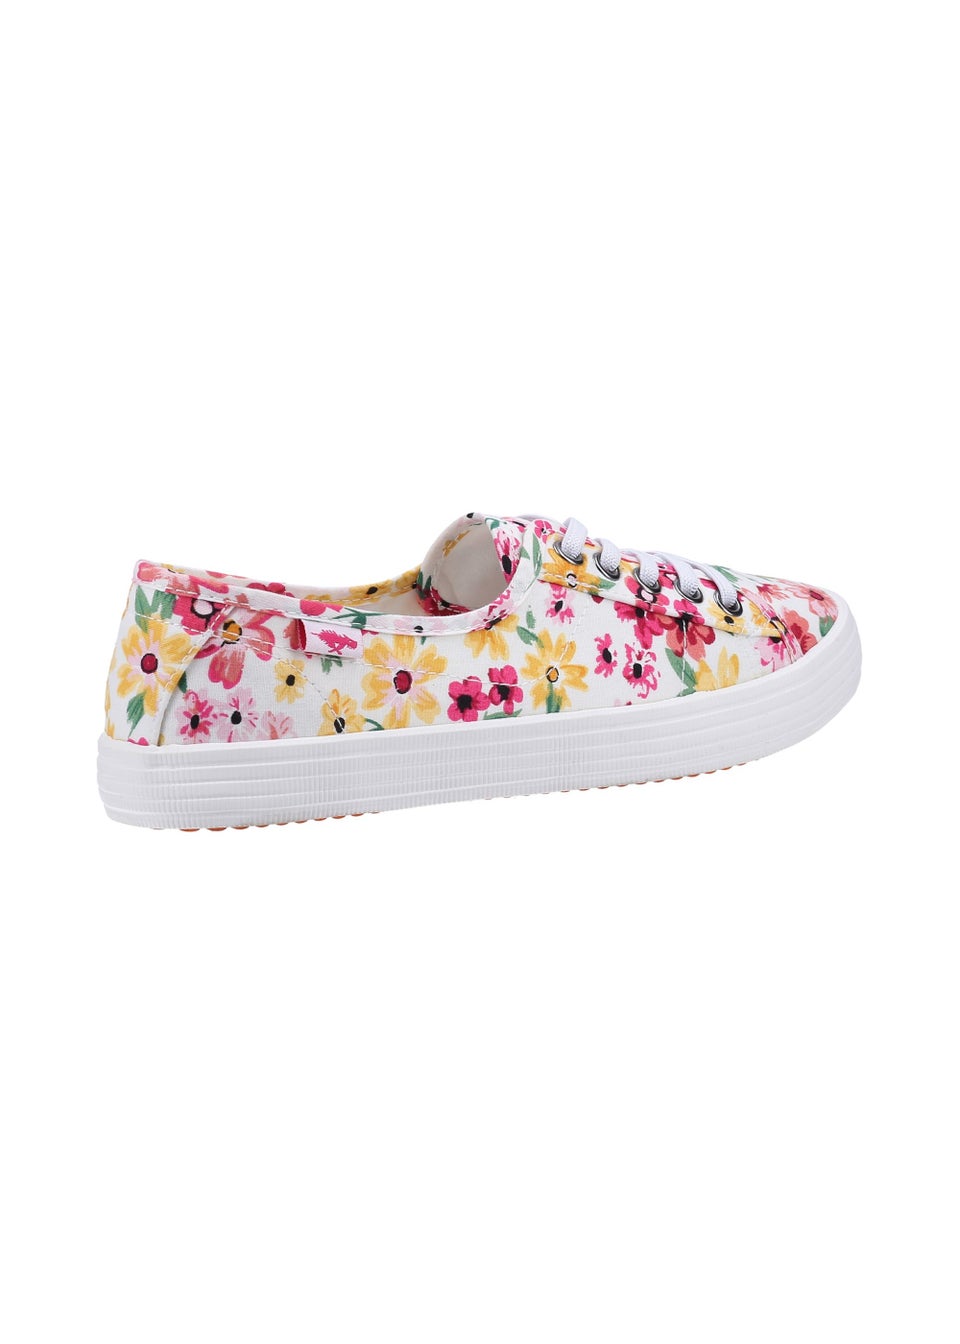 Rocket Dog White Chow Chow Margate Floral Casual Shoe - Matalan